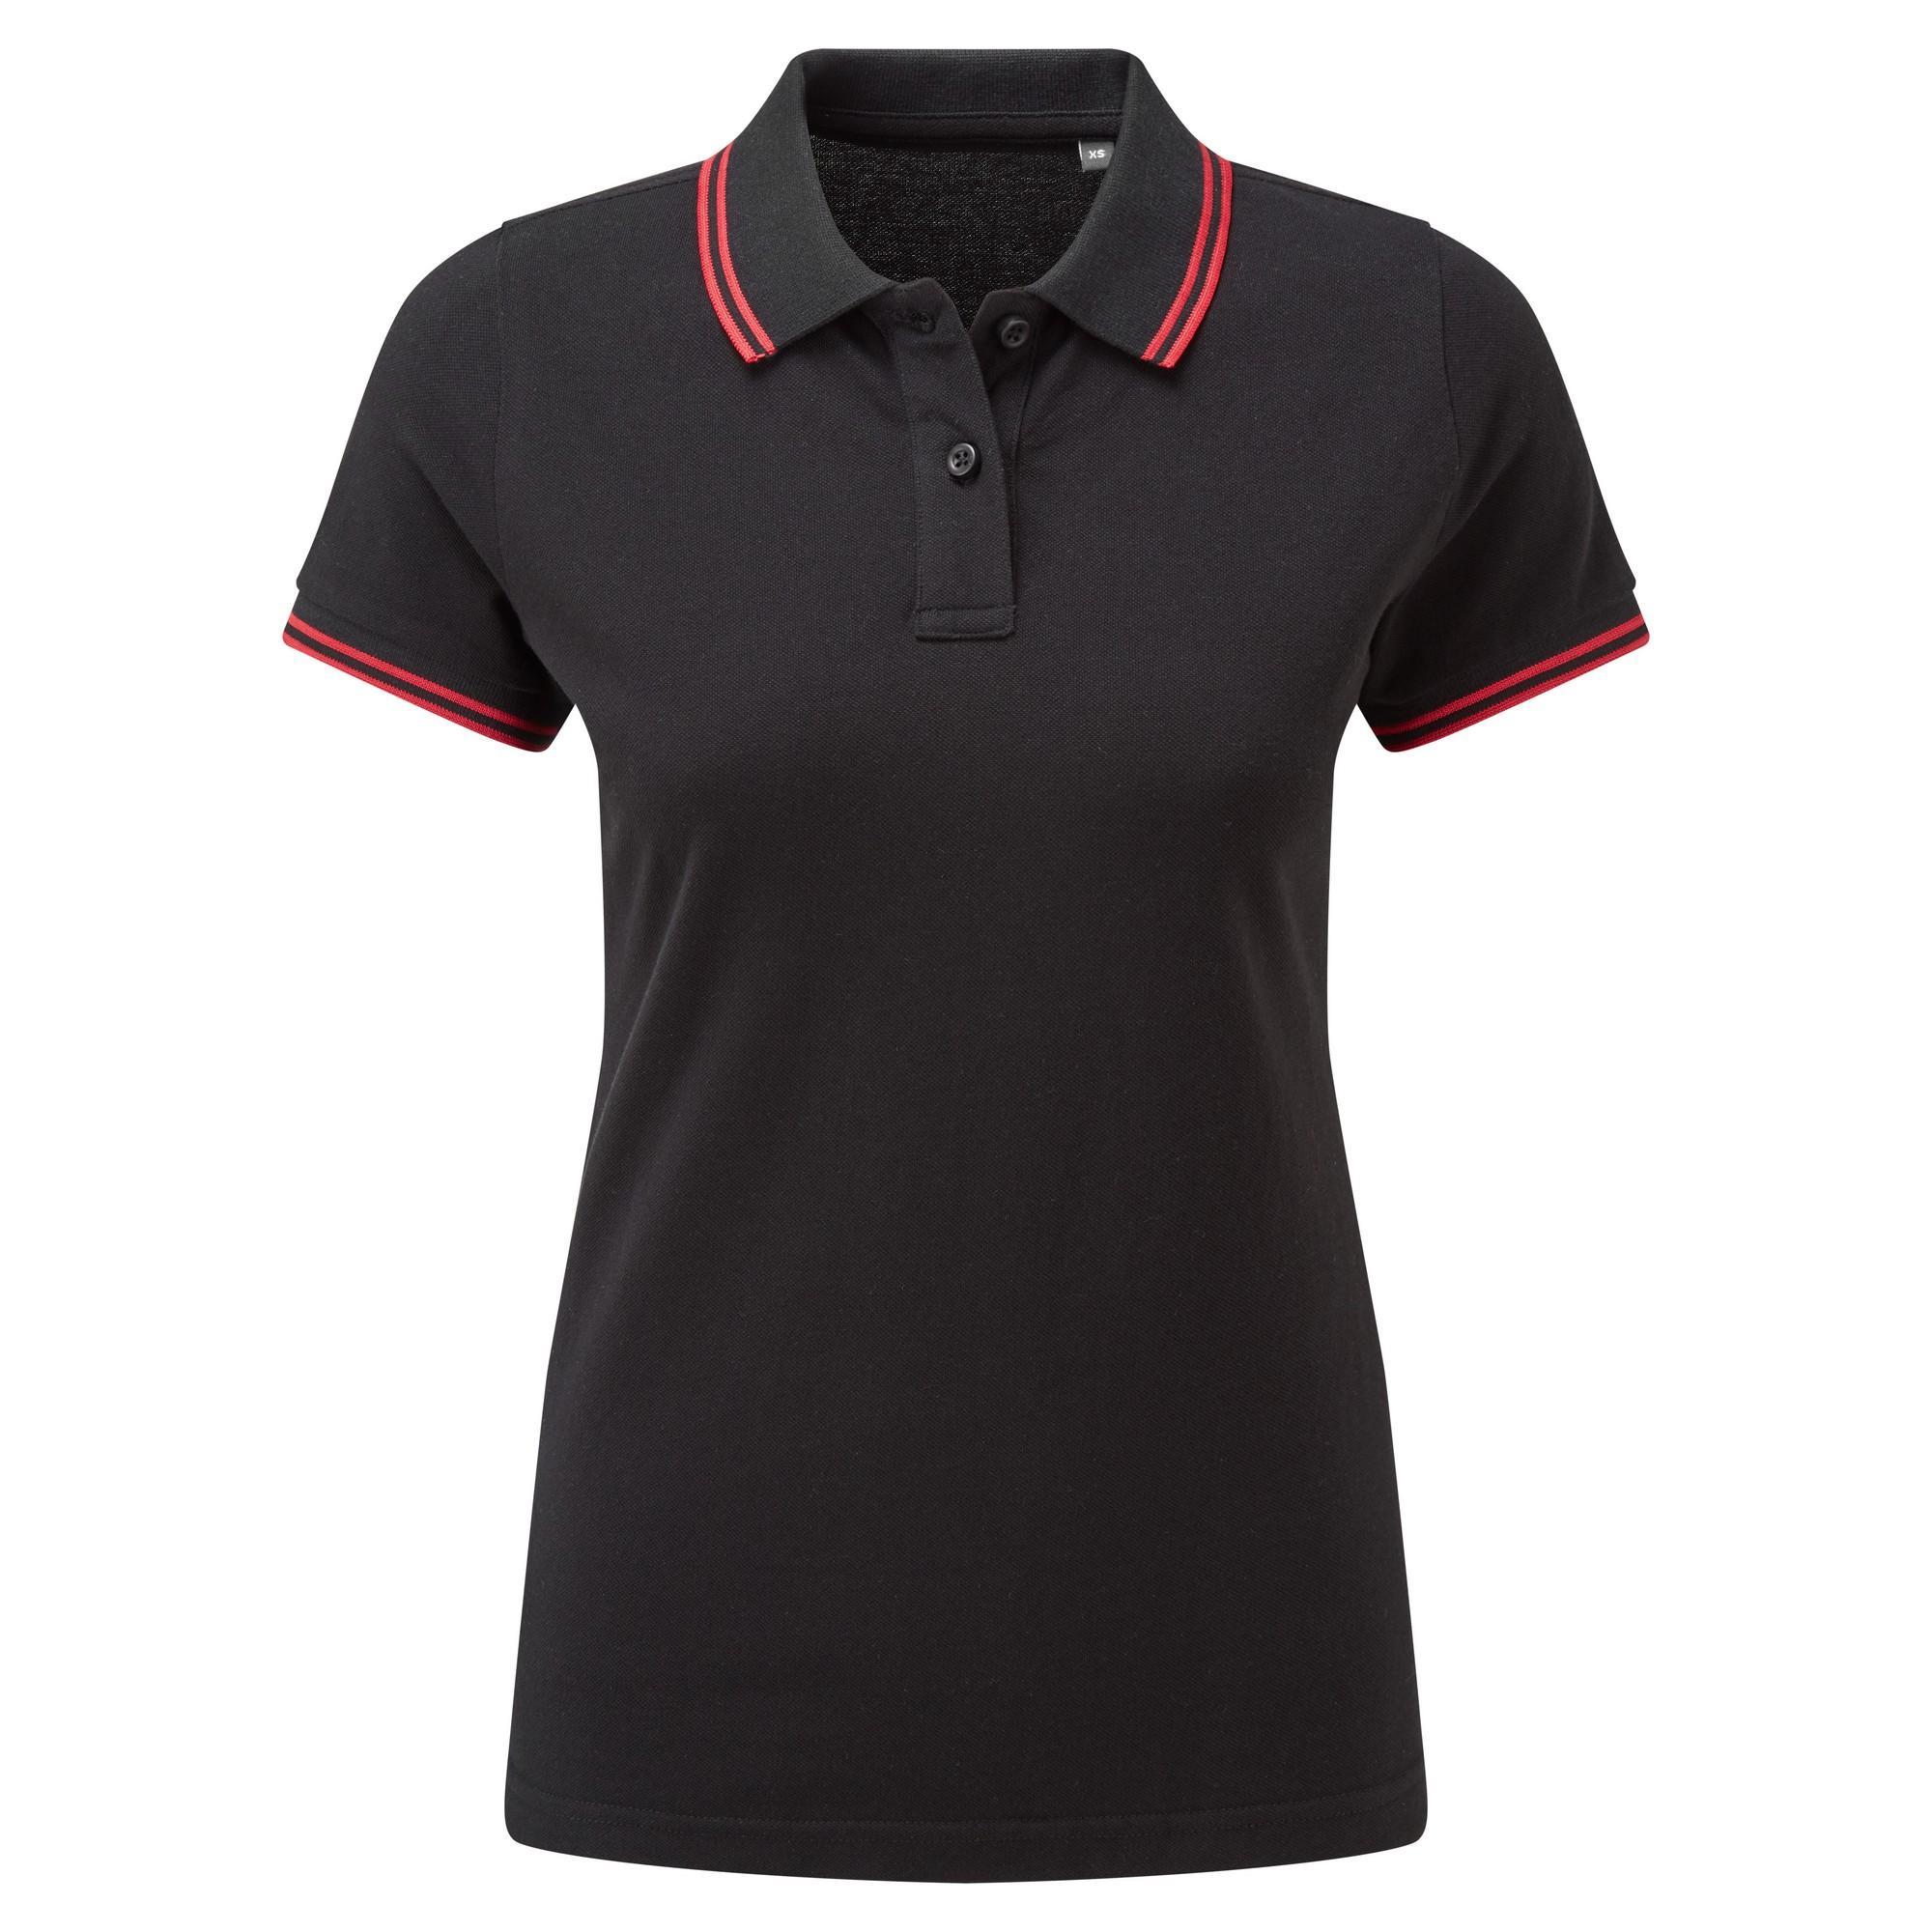 Asquith & Fox Womens/Ladies Classic Fit Tipped Polo (Black/Red) (XL)